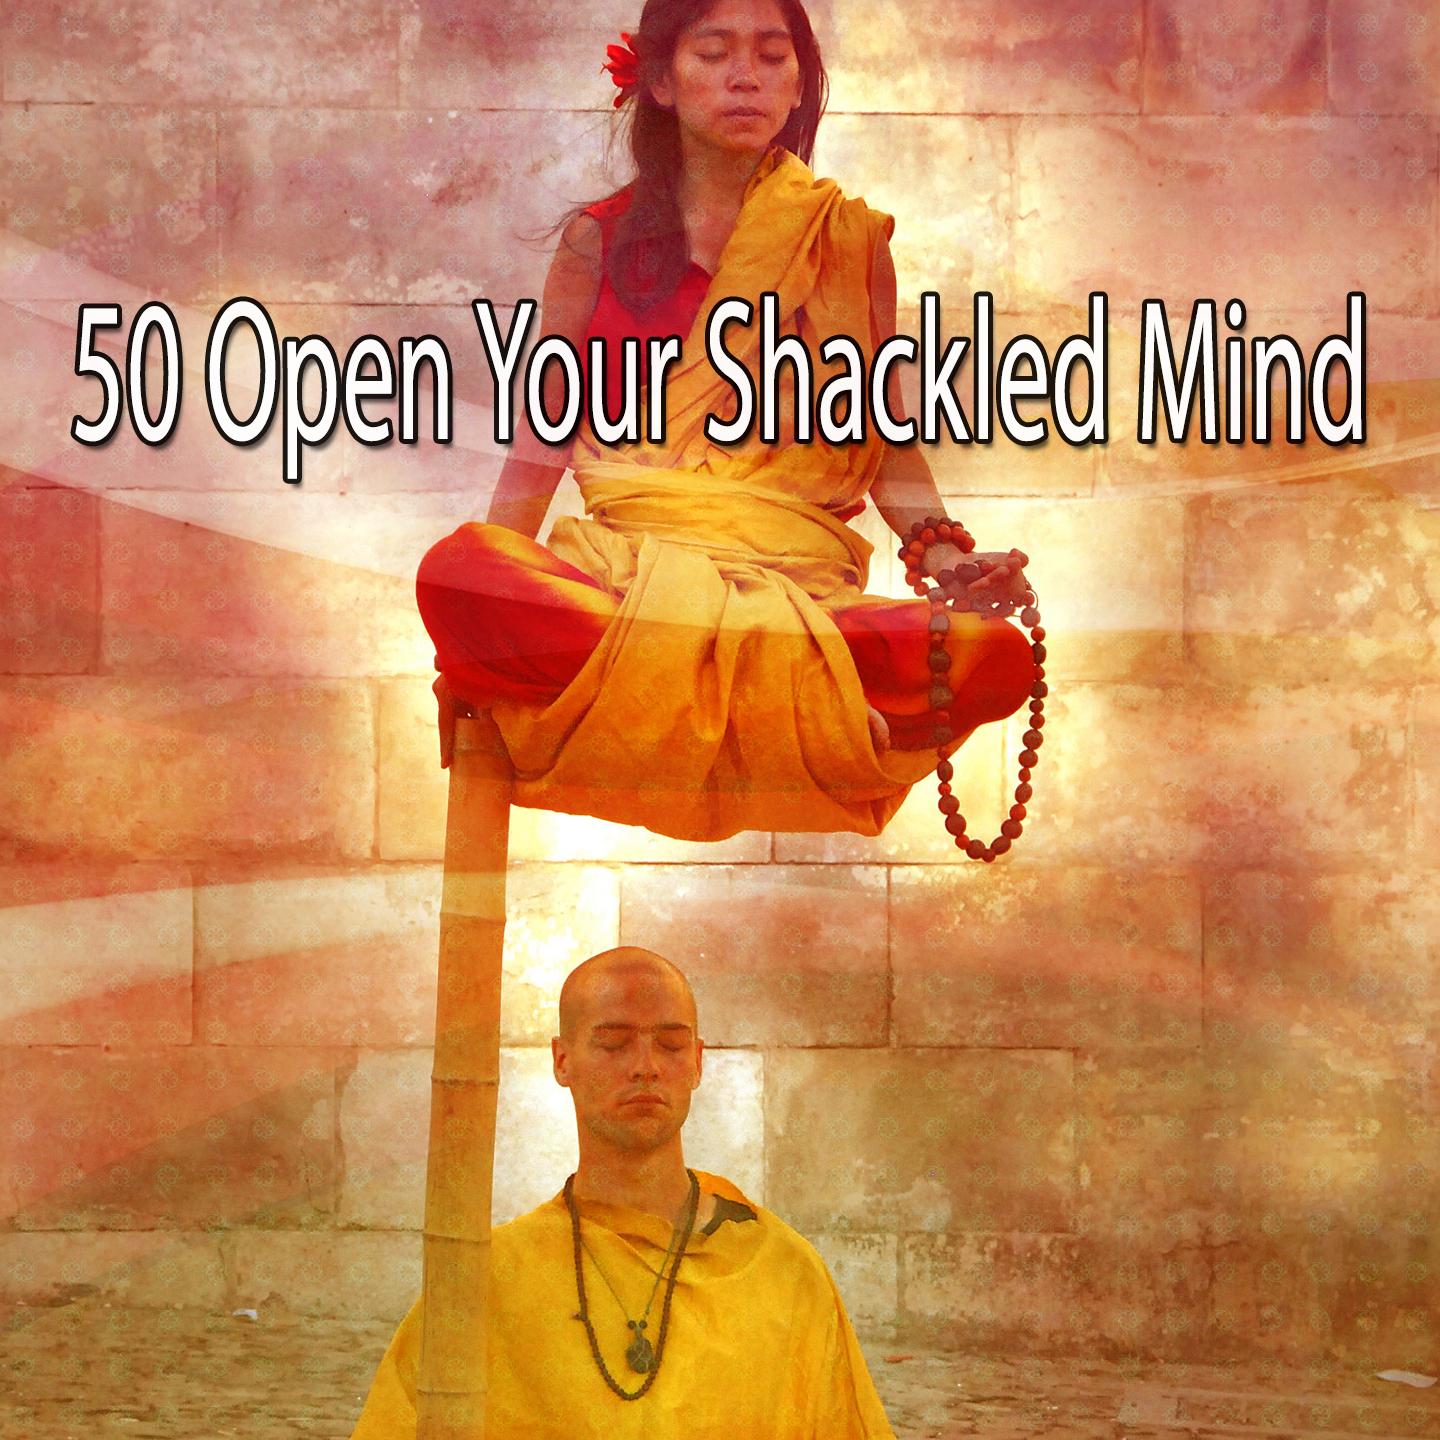 50 Open Your Shackled Mind